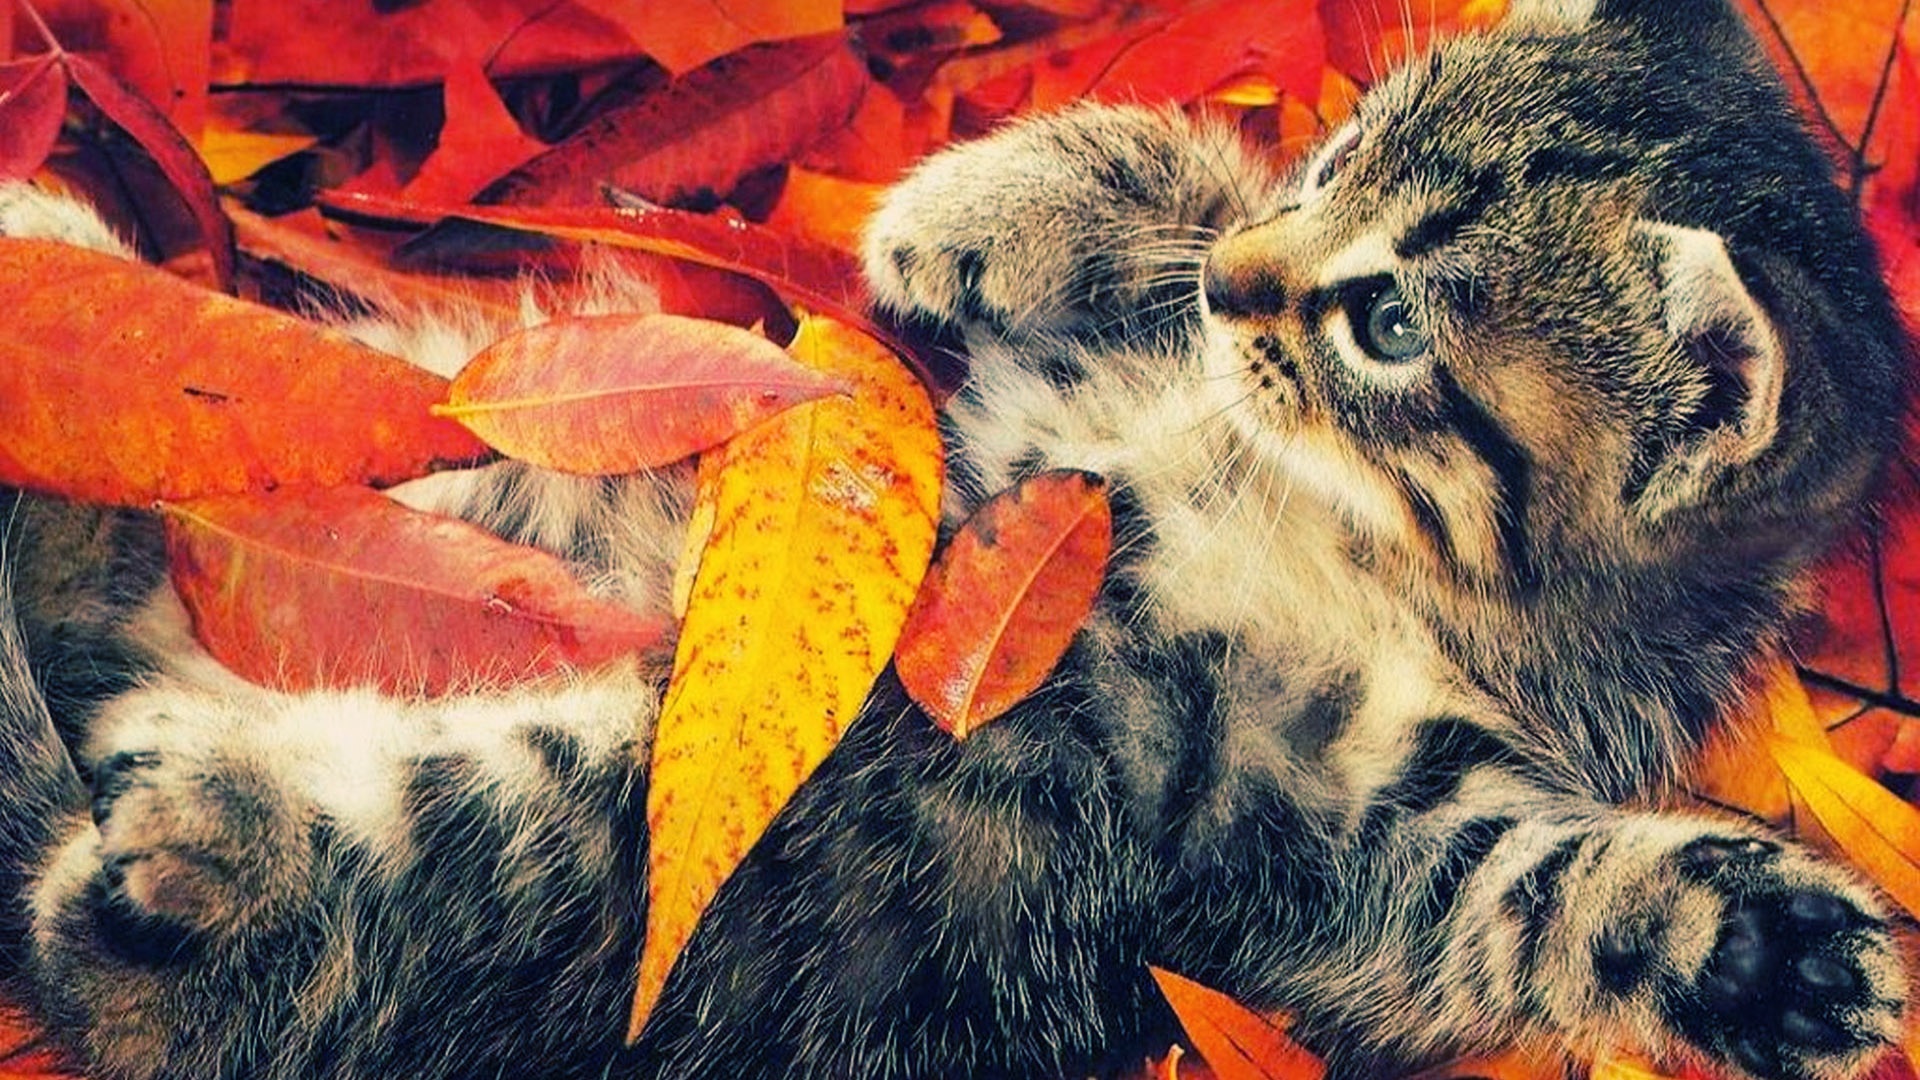 autumn wallpaper life animal wallpapers backgrounds 1920x1080